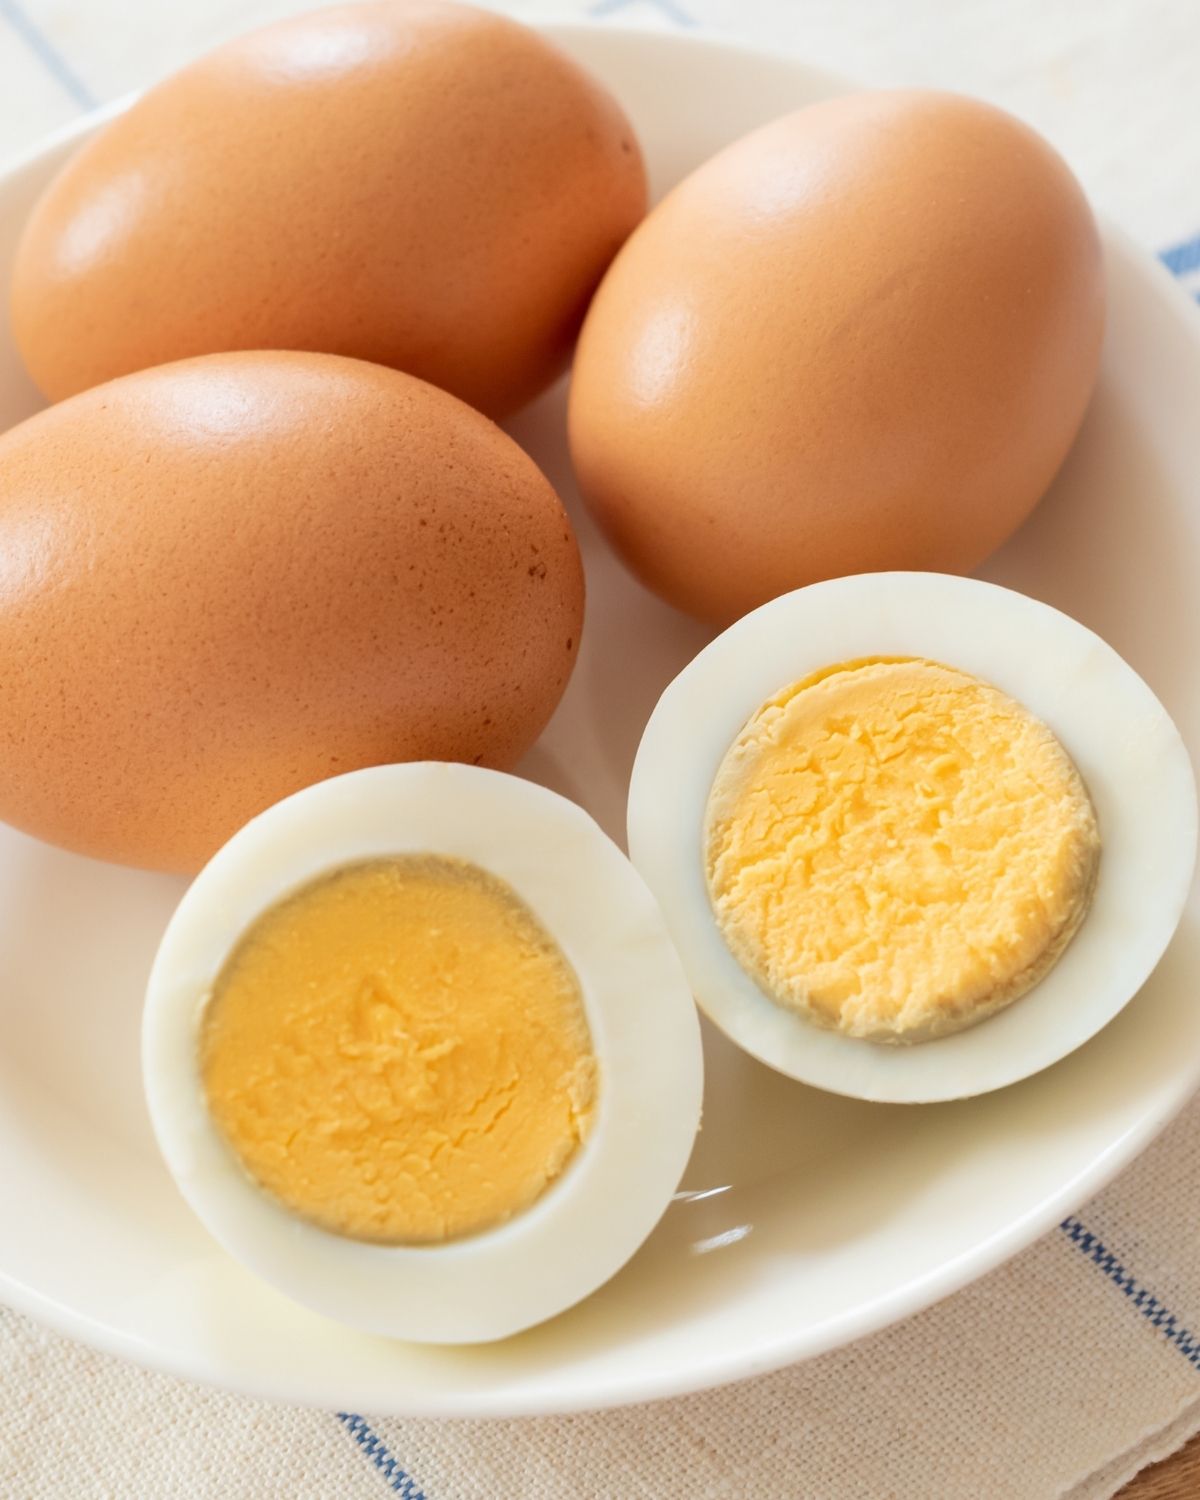 Easy Peel Cooked Eggs (5 Ways). One perfect hard boiled egg cut in half.